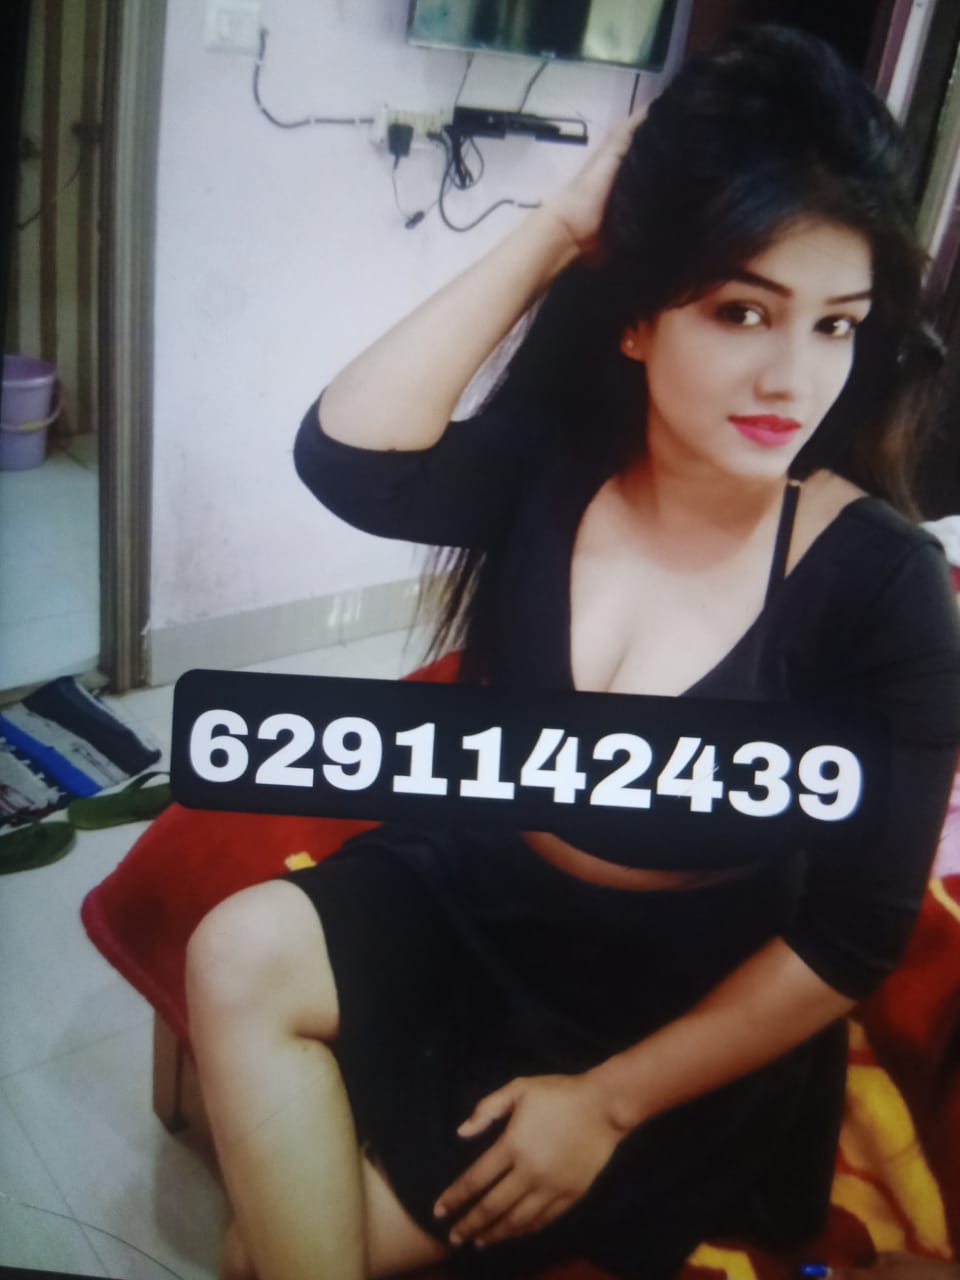 Jubilee hills high class girls service available here any time 